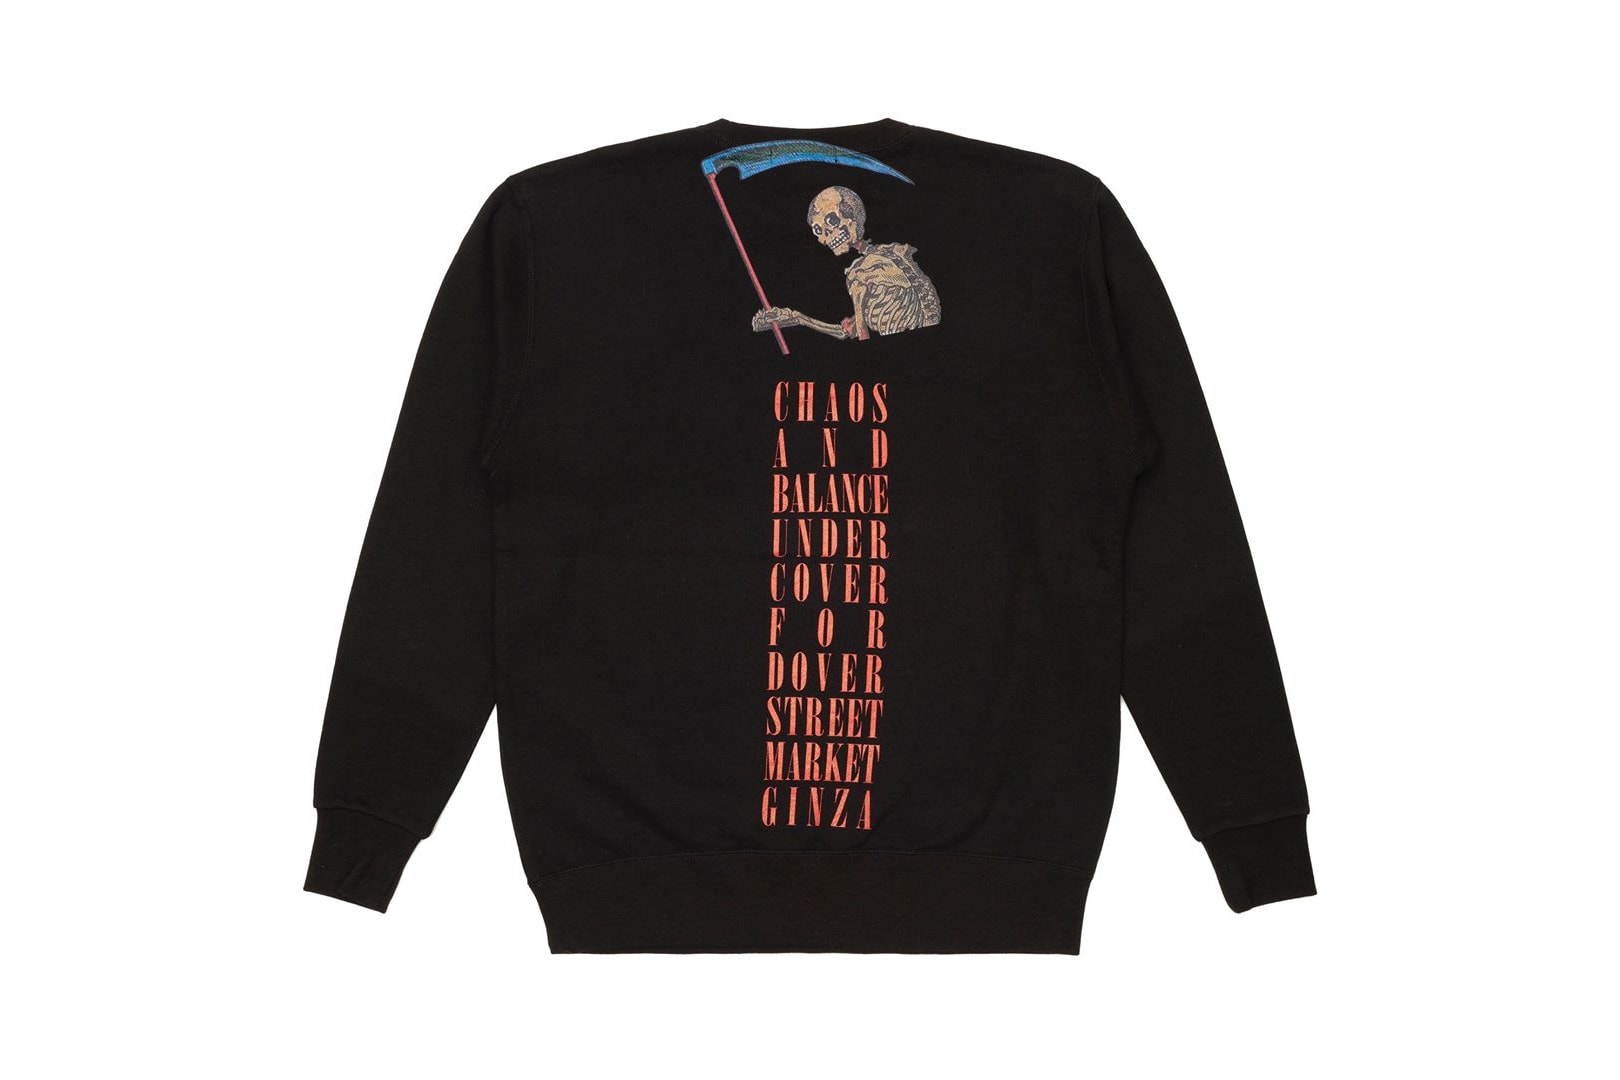 UNDERCOVER Dover Street Market Ginza 5th Anniversary Chaos and Balance Reaper Crewneck Back